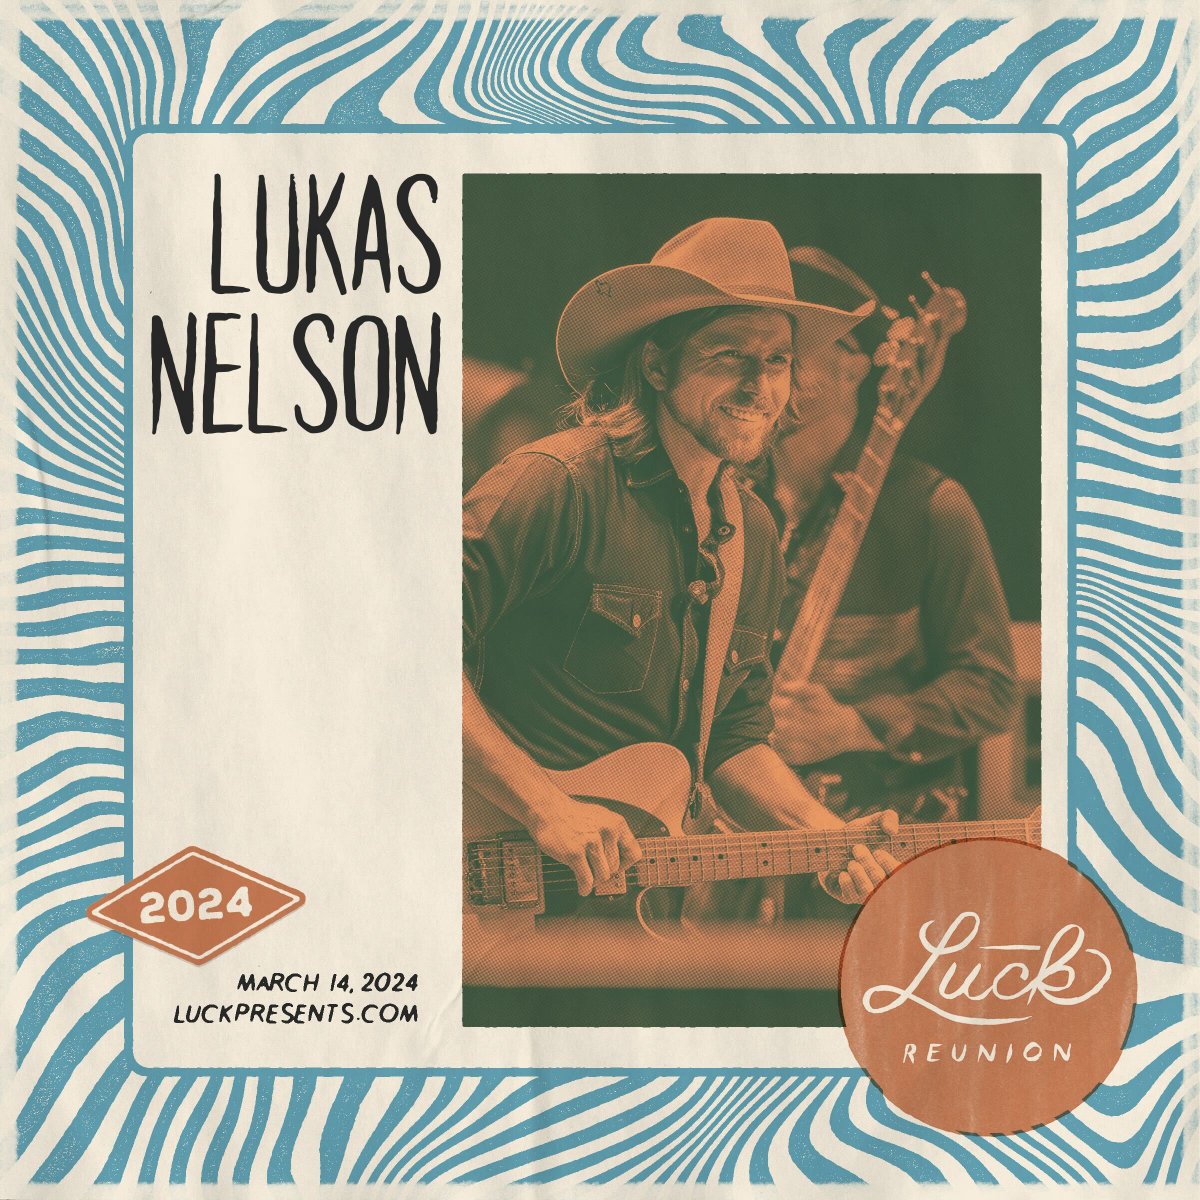 Excited to take the Chapel Stage at @luckreunion this Thursday, 3.14… See you in Luck!

#luckreunion #lucktexas #chapel